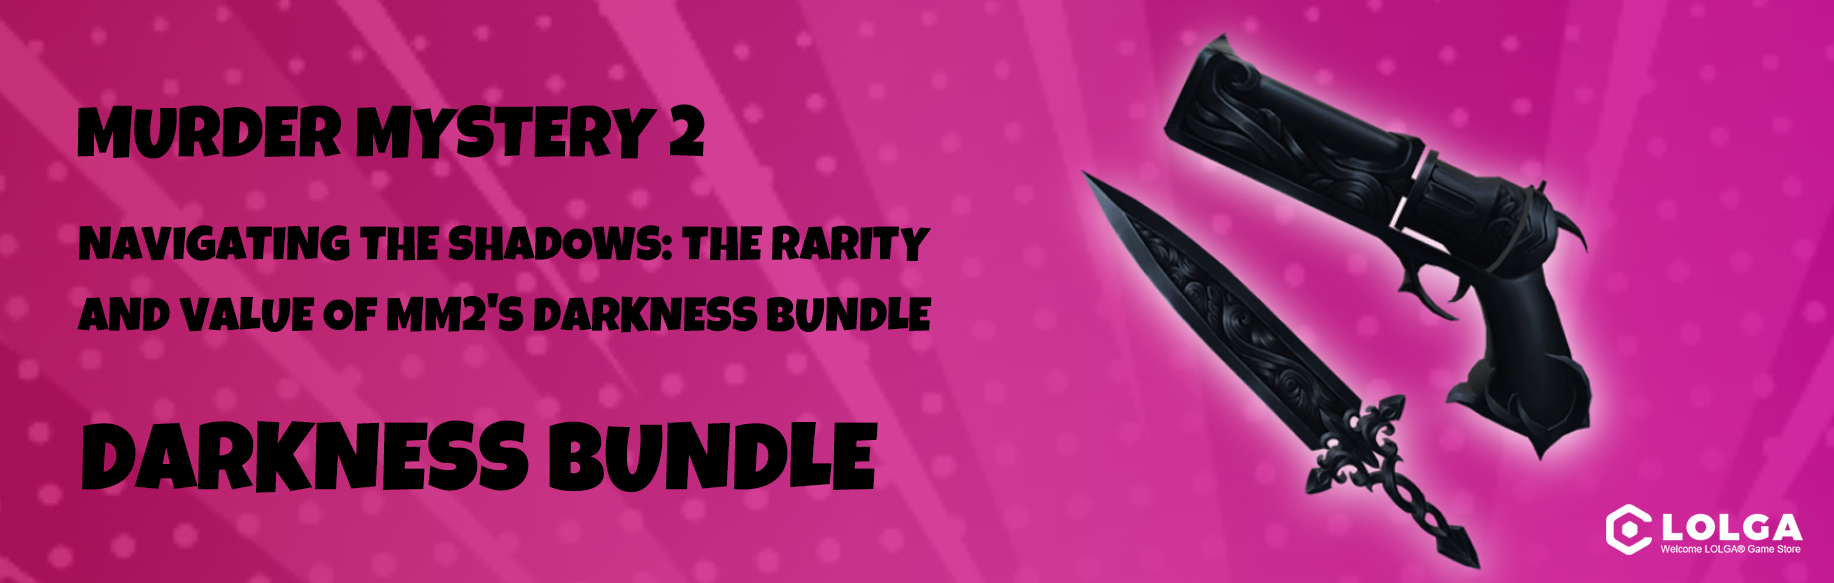 Navigating the Shadows: The Rarity and Value of MM2's Darkness Bundle?